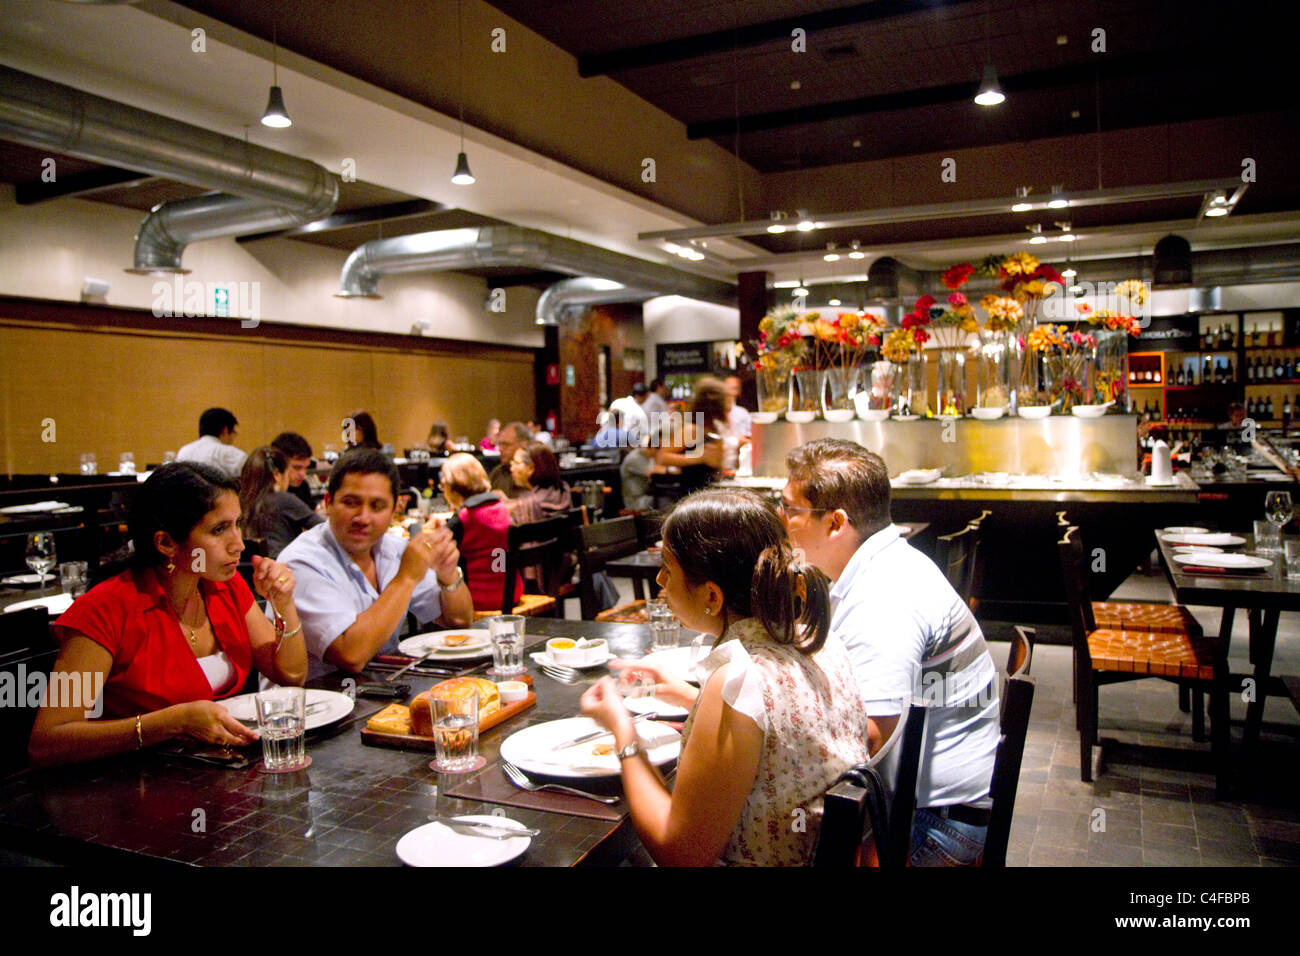 People dine at a restaurant in the Miraflores district of Lima, Peru. Stock Photo